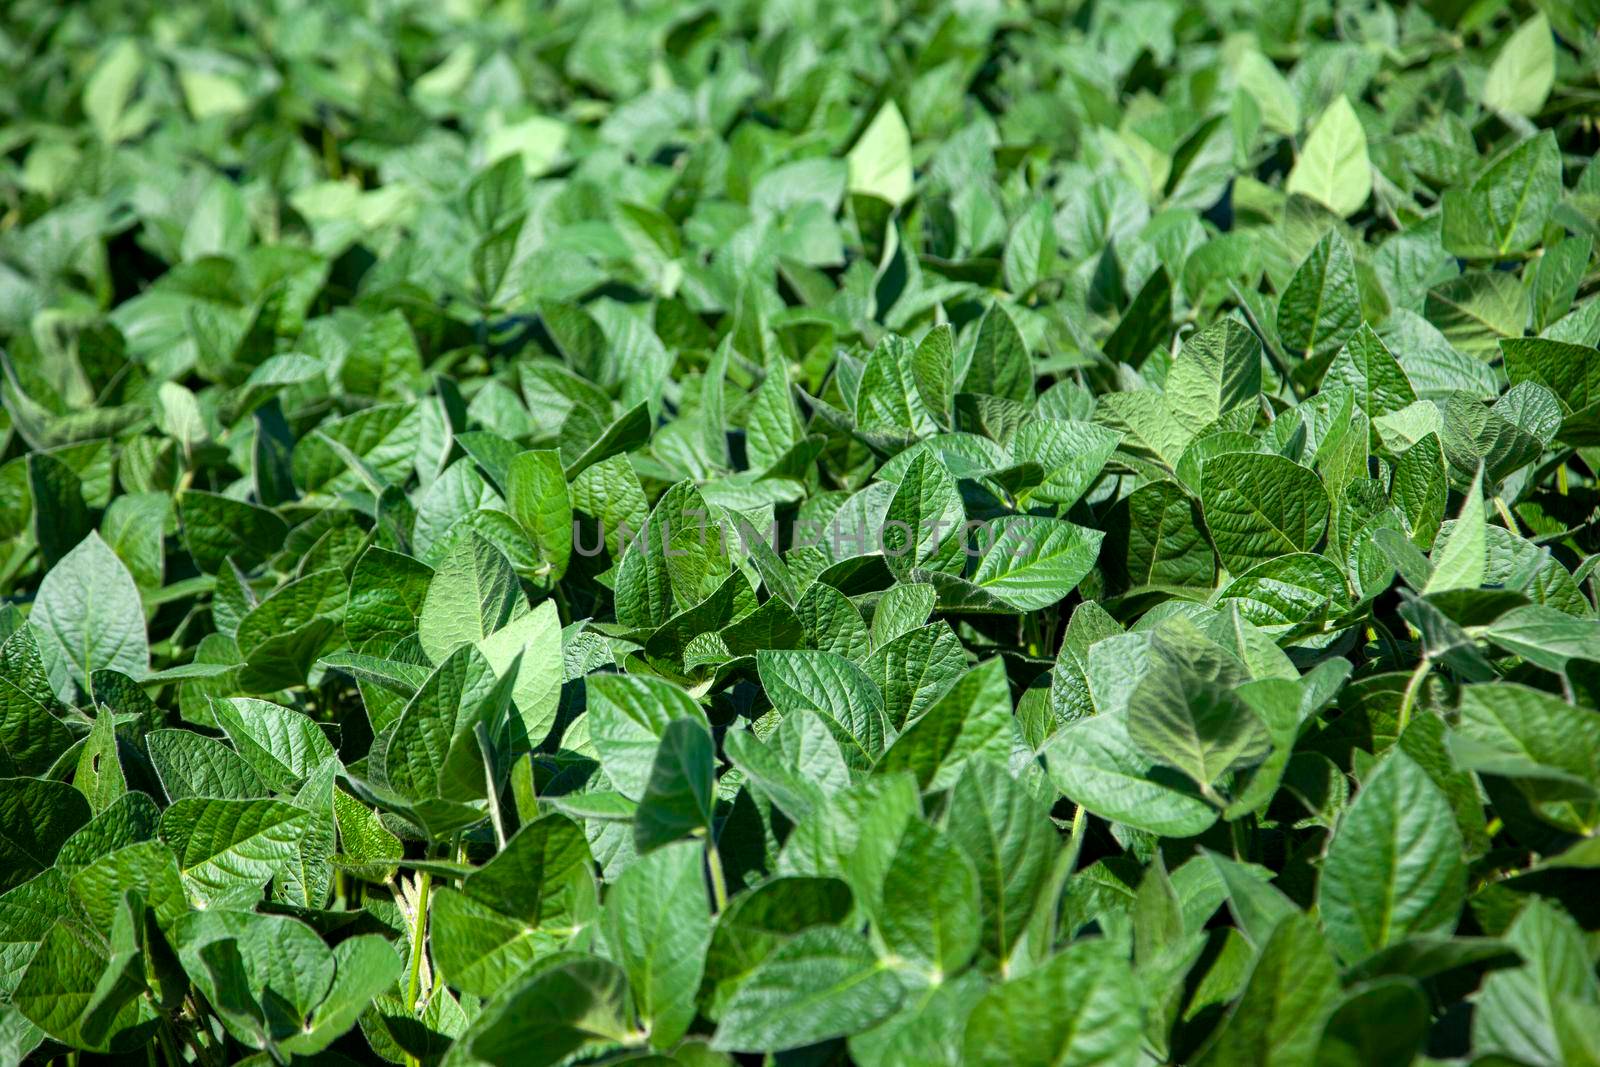 close view of soy leaves in a farm or field of soya plants 